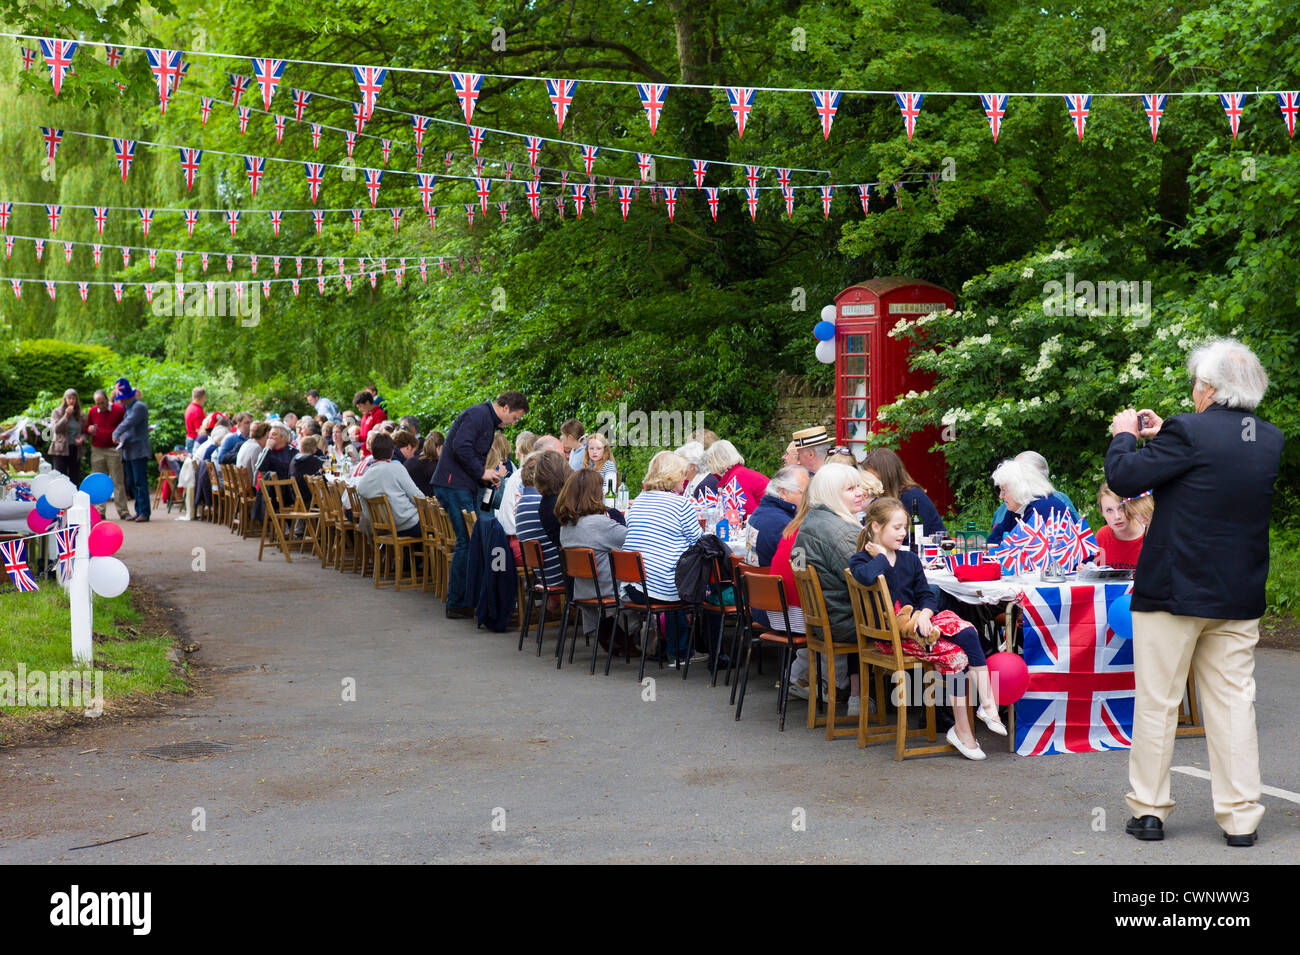 Street party with Union Jack flags and bunting to celebrate Queen's Diamond Jubilee at Swinbrook in The Cotswolds, UK Stock Photo